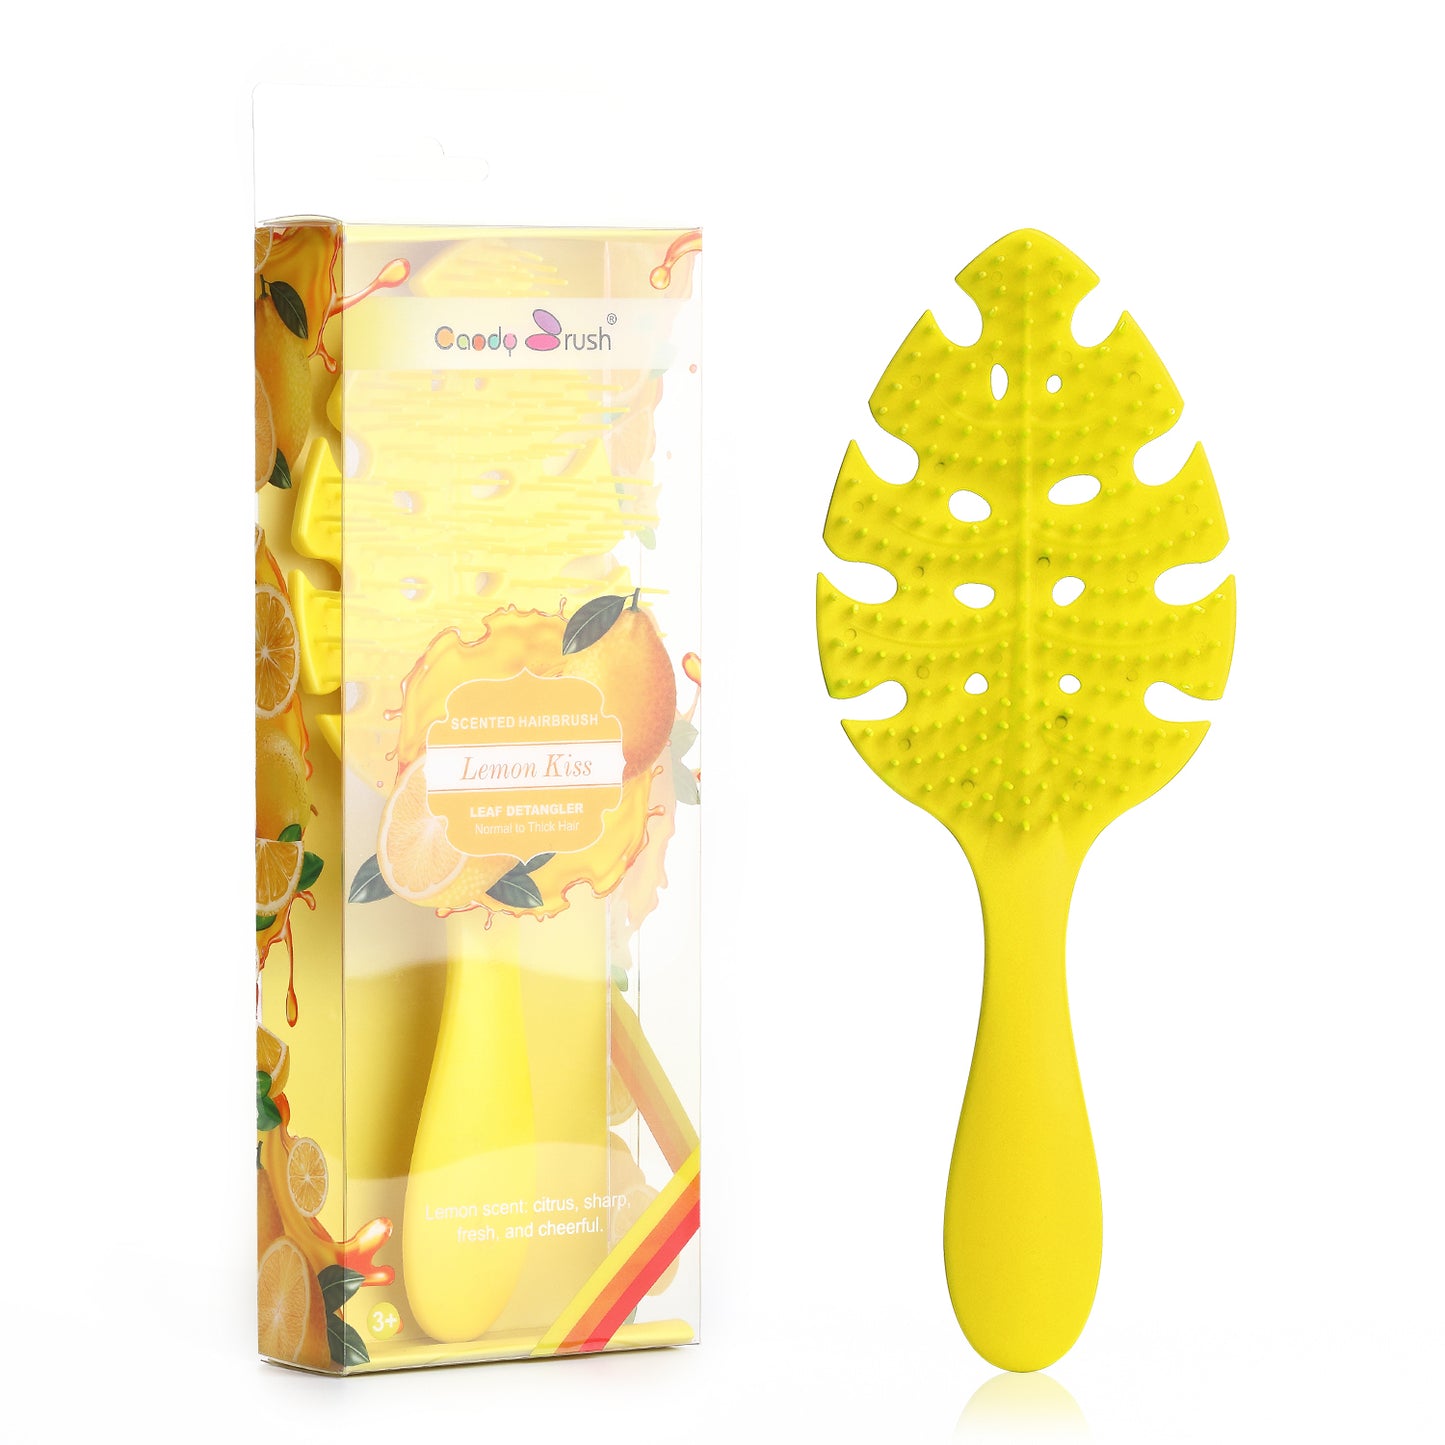 Wet Brush Mini for Kids Baby Girls Hair Dryer Curly Hair Straightener Travel Detangling Vented Brushes Mood-Boosting Leaf Form Hairbrush with Strawberry Scented Large